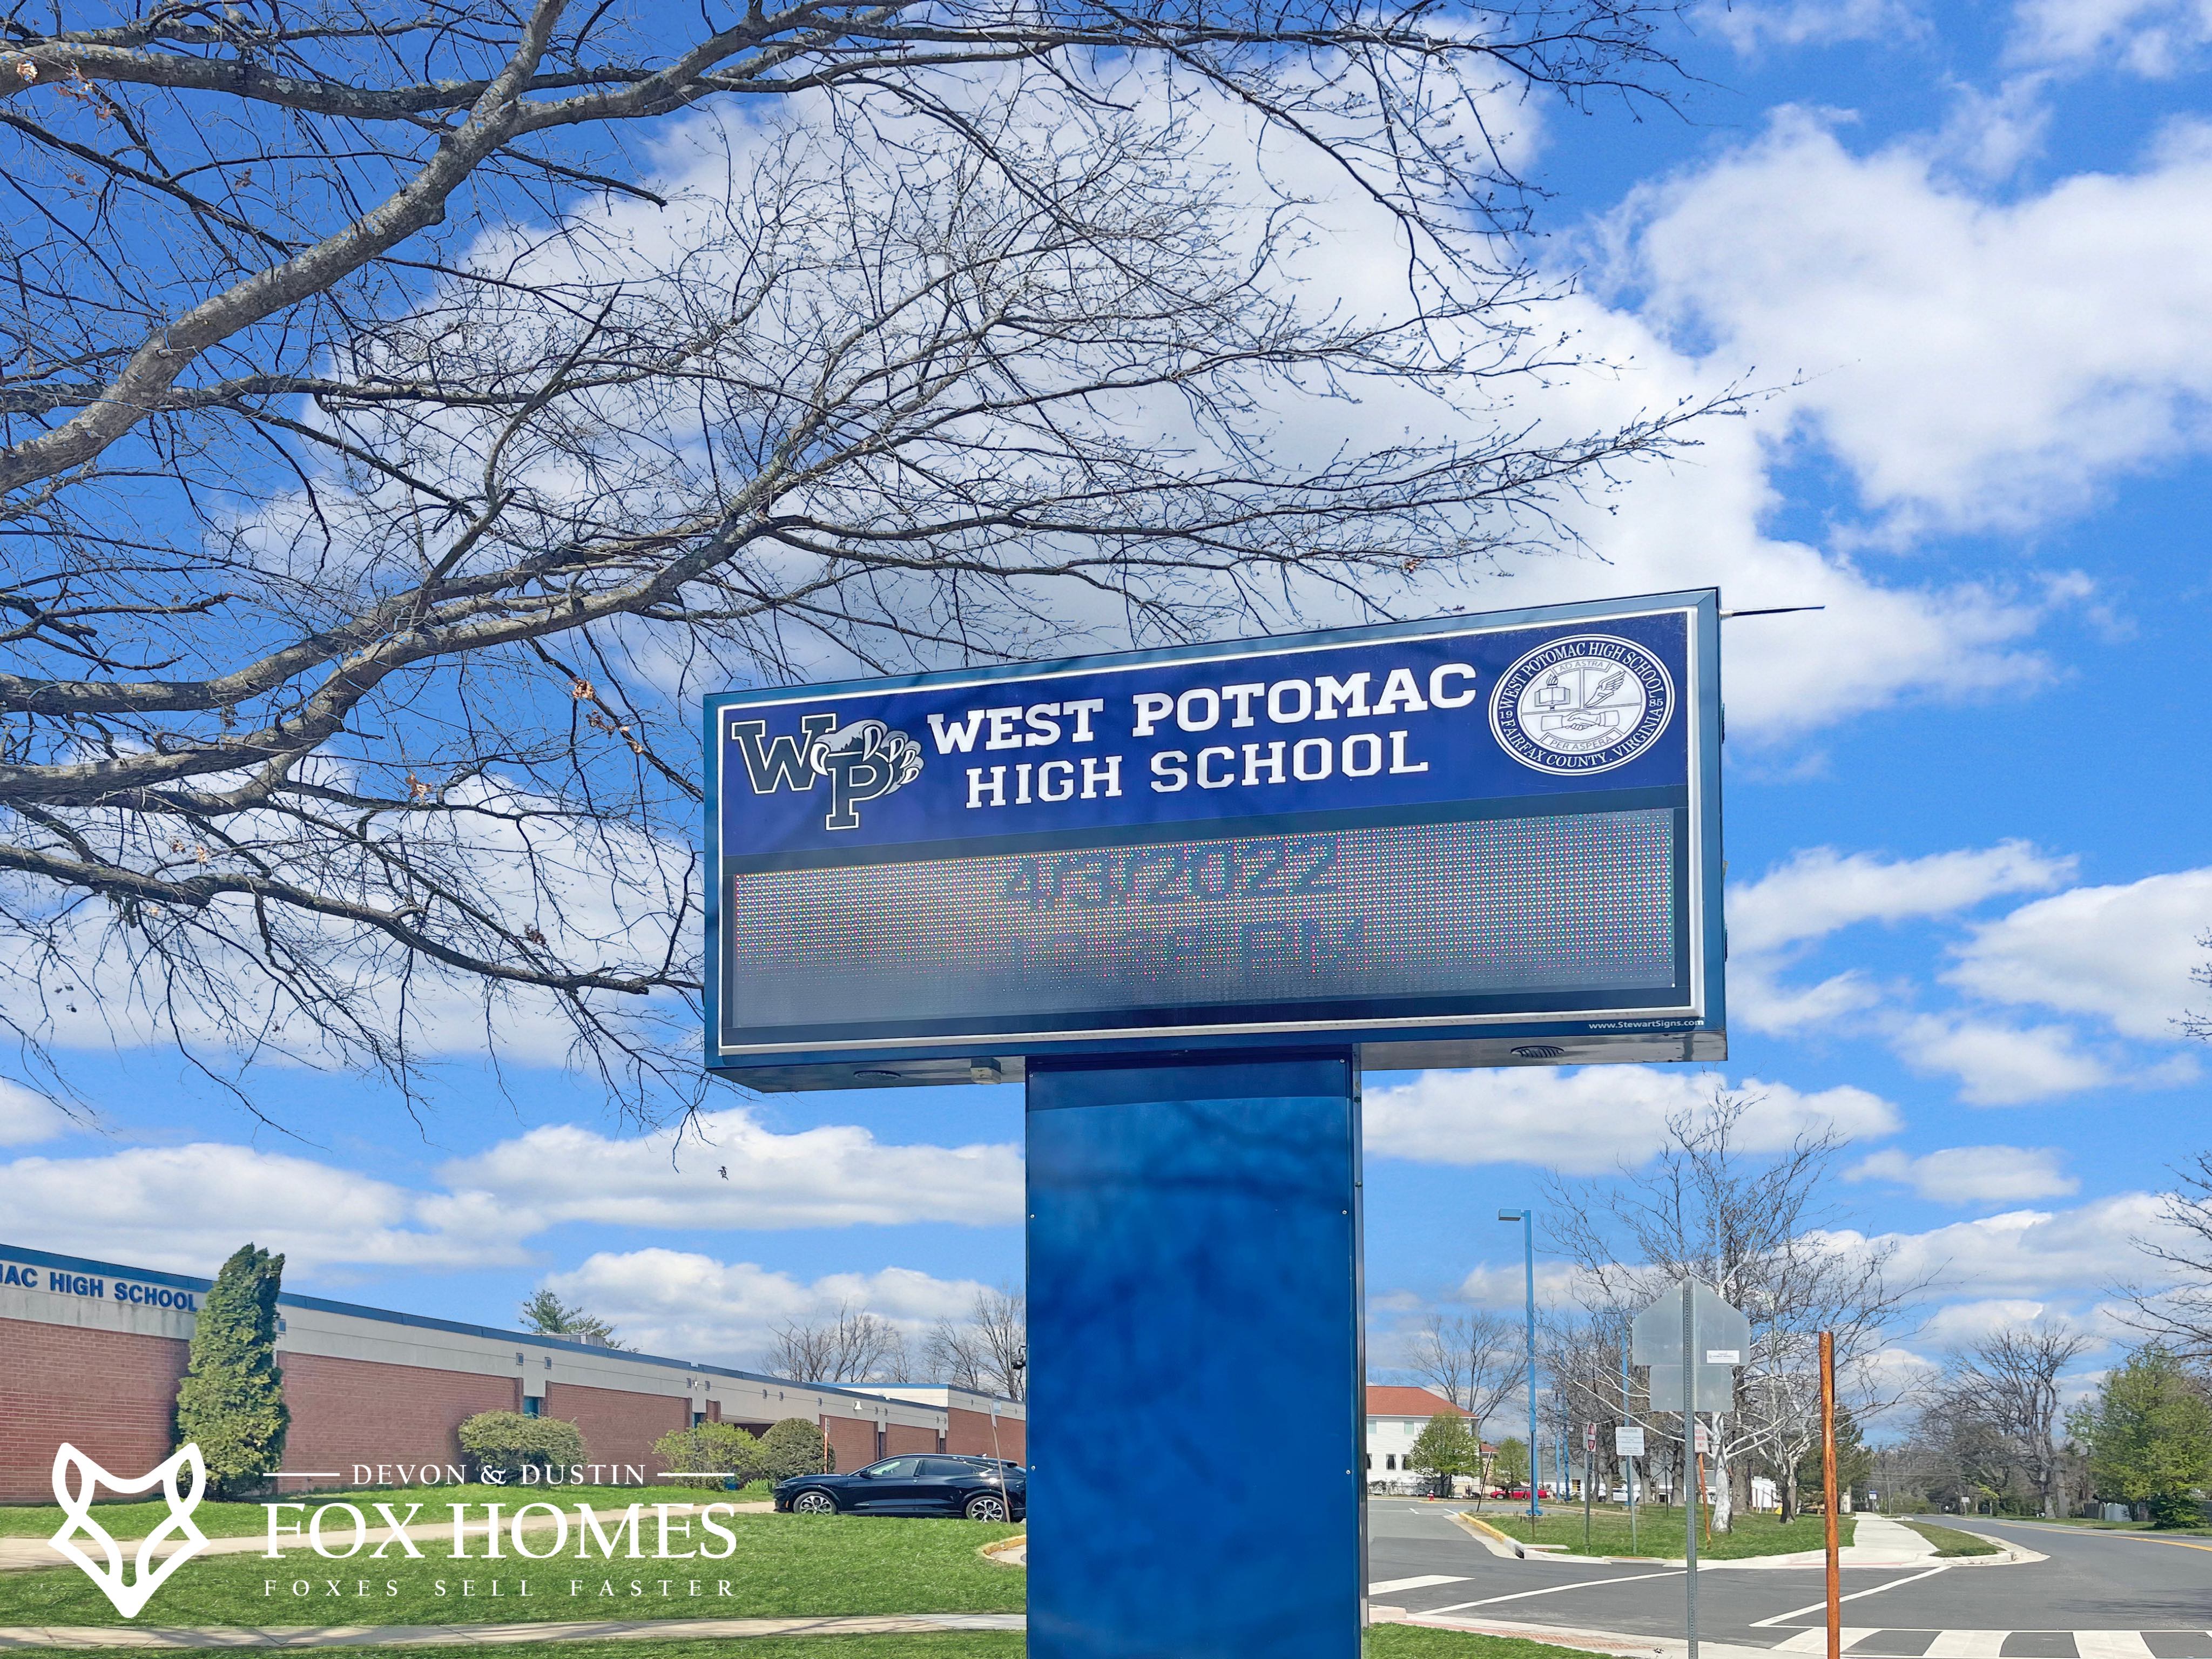 homes-for-sale-in-west-potomac-high-school-district-devon-and-dustin-fox-homes-front-sign